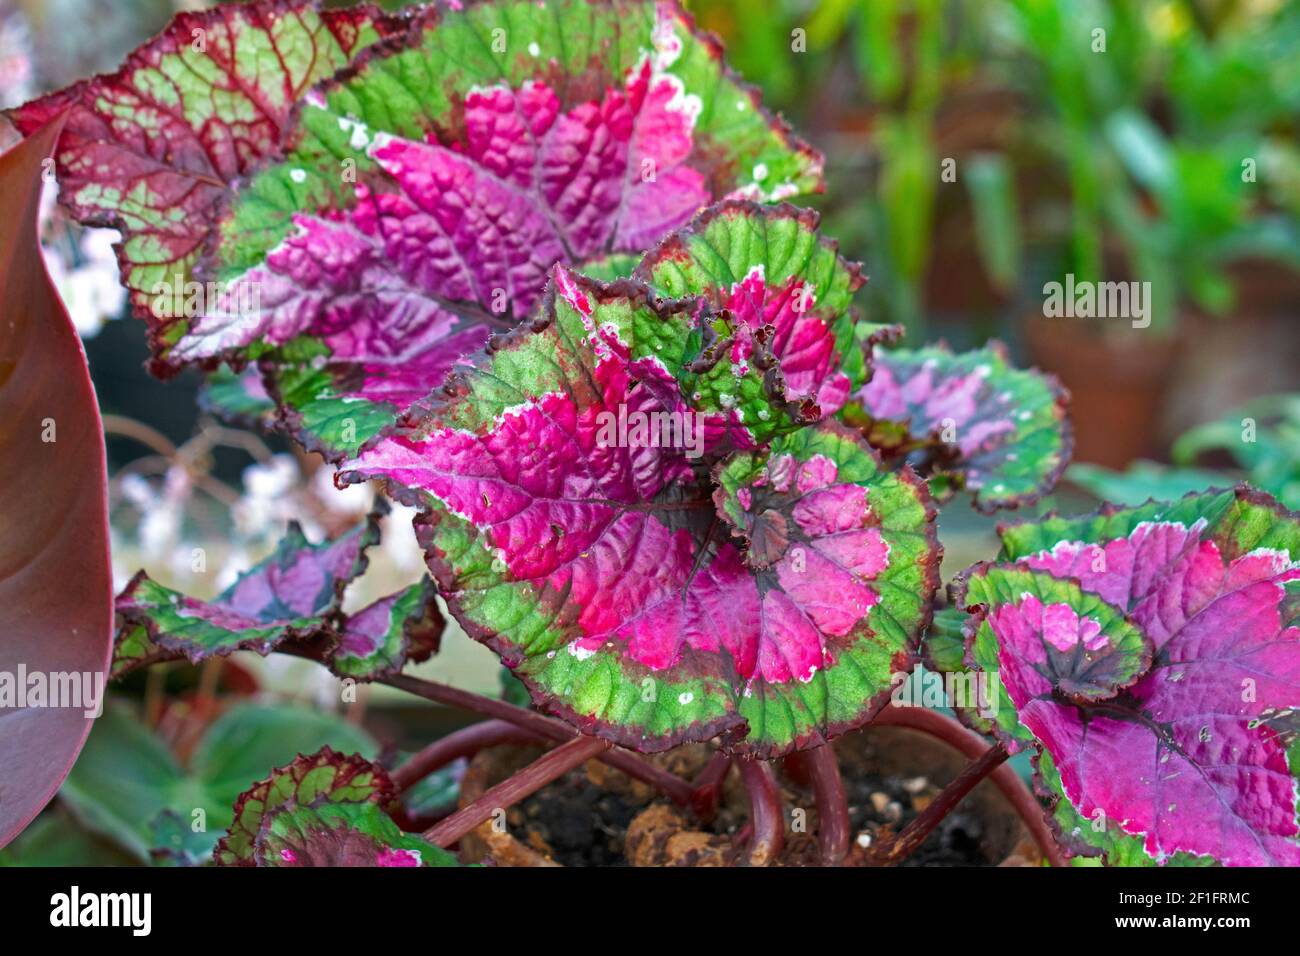 Pink and green colored Rex Begonia Leaves on a blurred leafy background -02 Stock Photo